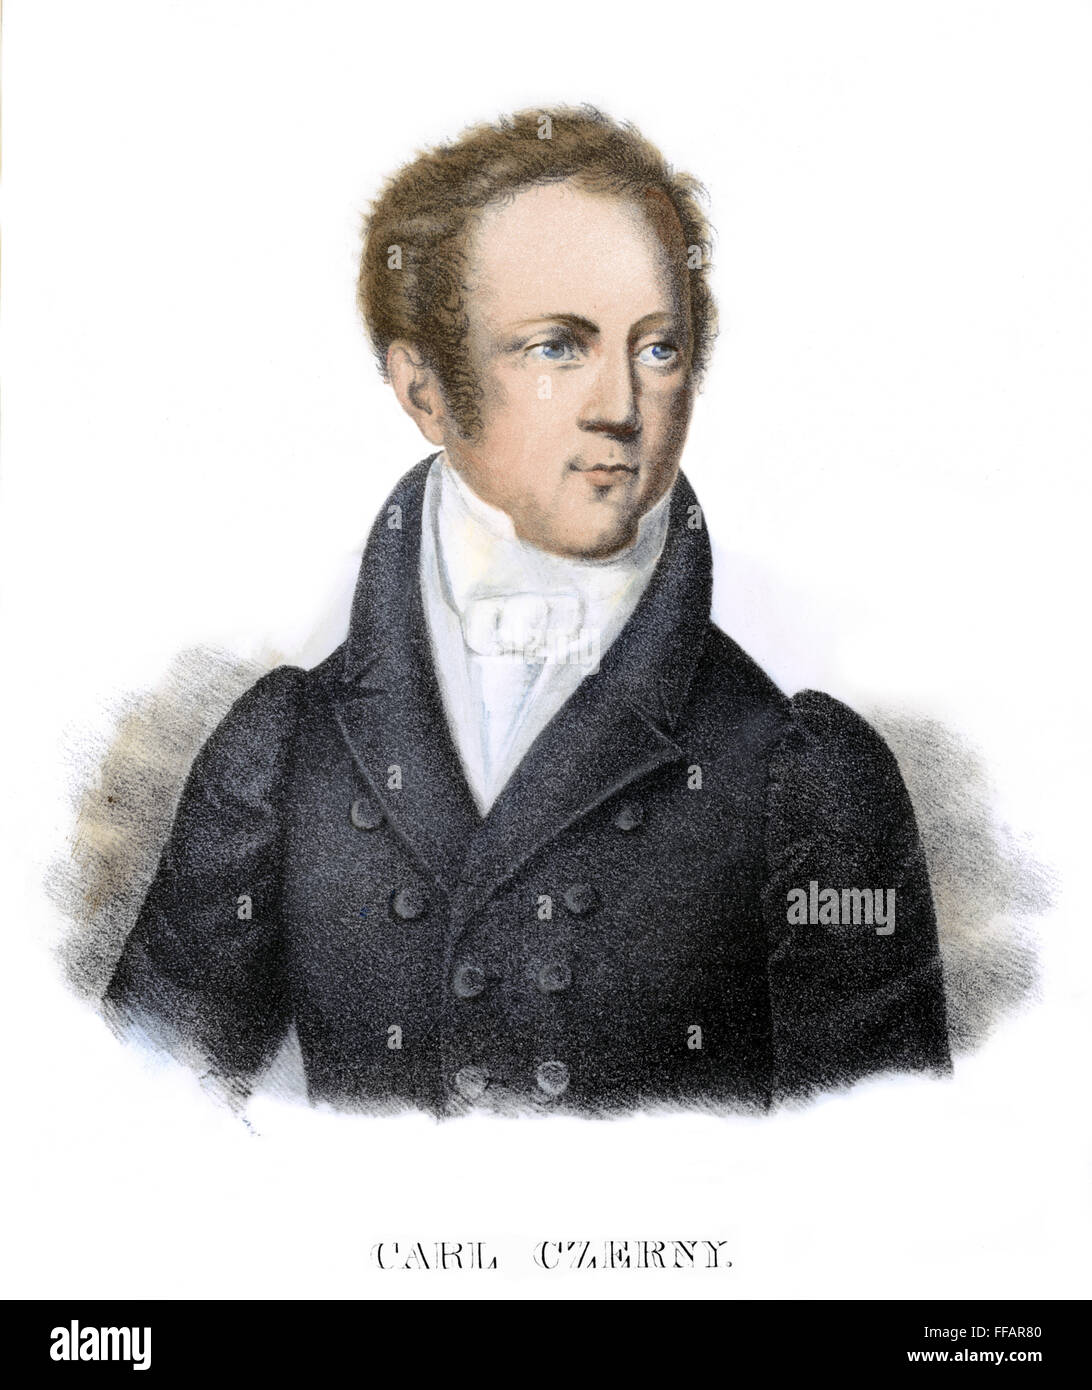 KARL CZERNY (1791-1857). /nAustrian pianist and composer. Lithograph, 19th century. Stock Photo